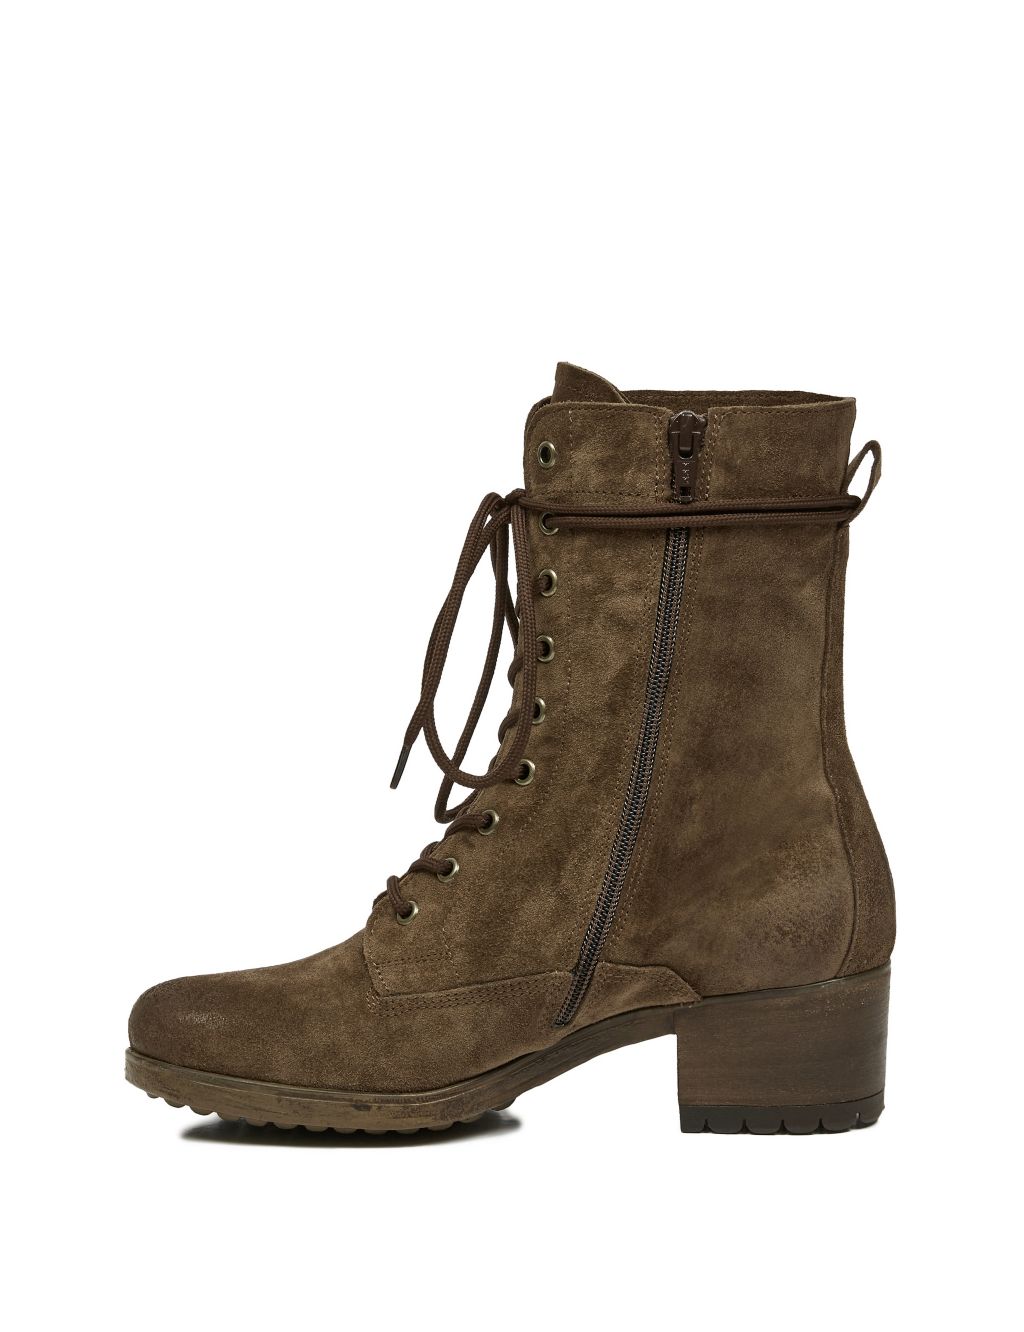 Suede Lace Up Block Heel Ankle Boots image 4